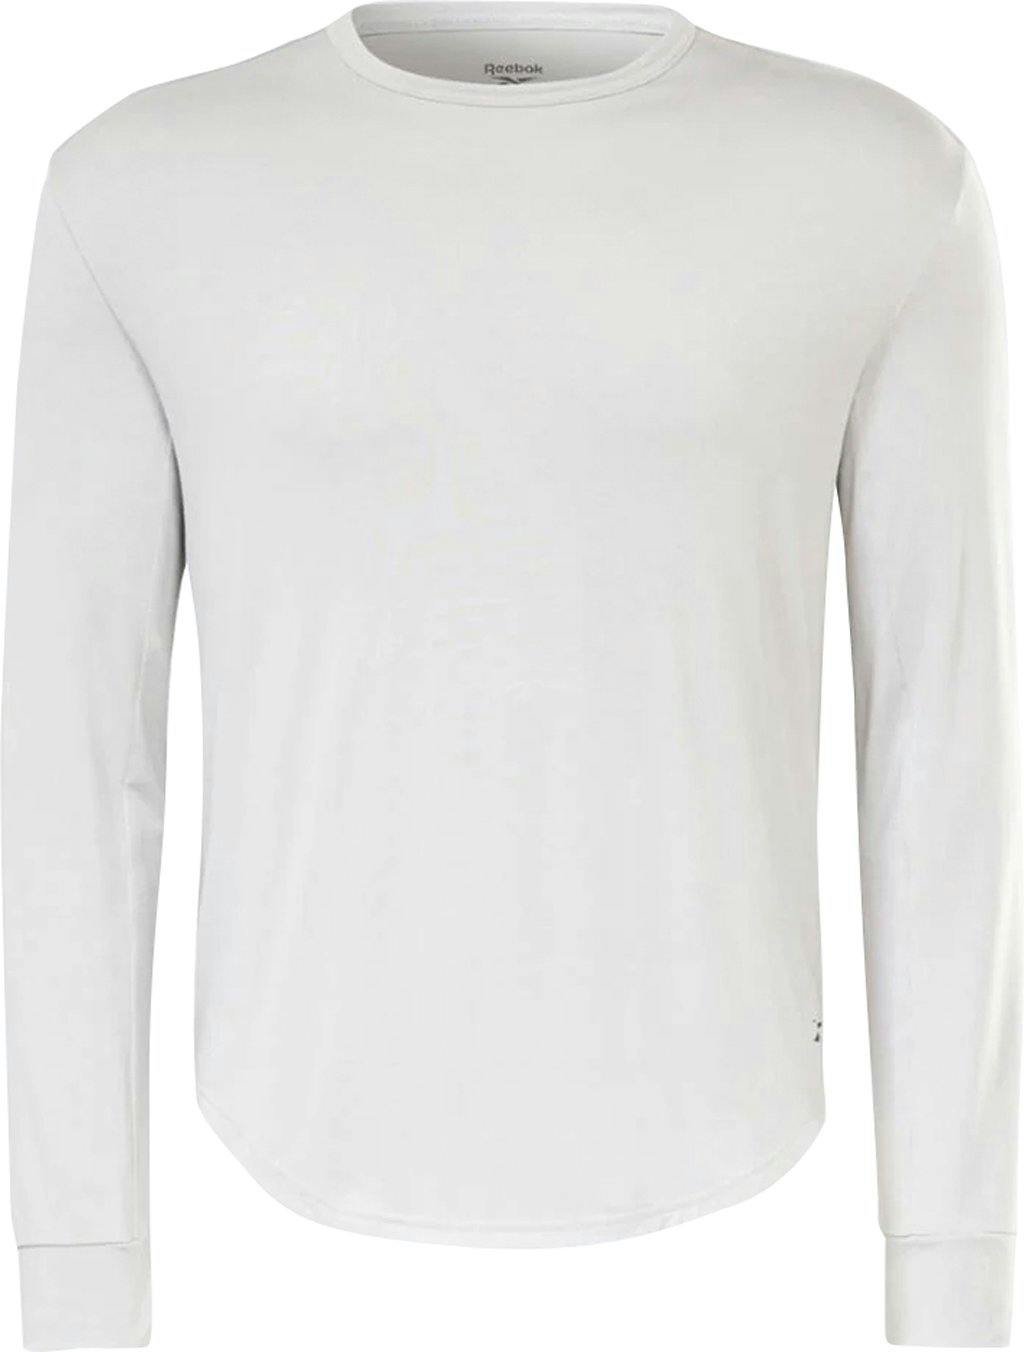 Product image for Activchill+Dreamblend Long Sleeve T-Shirt - Men's